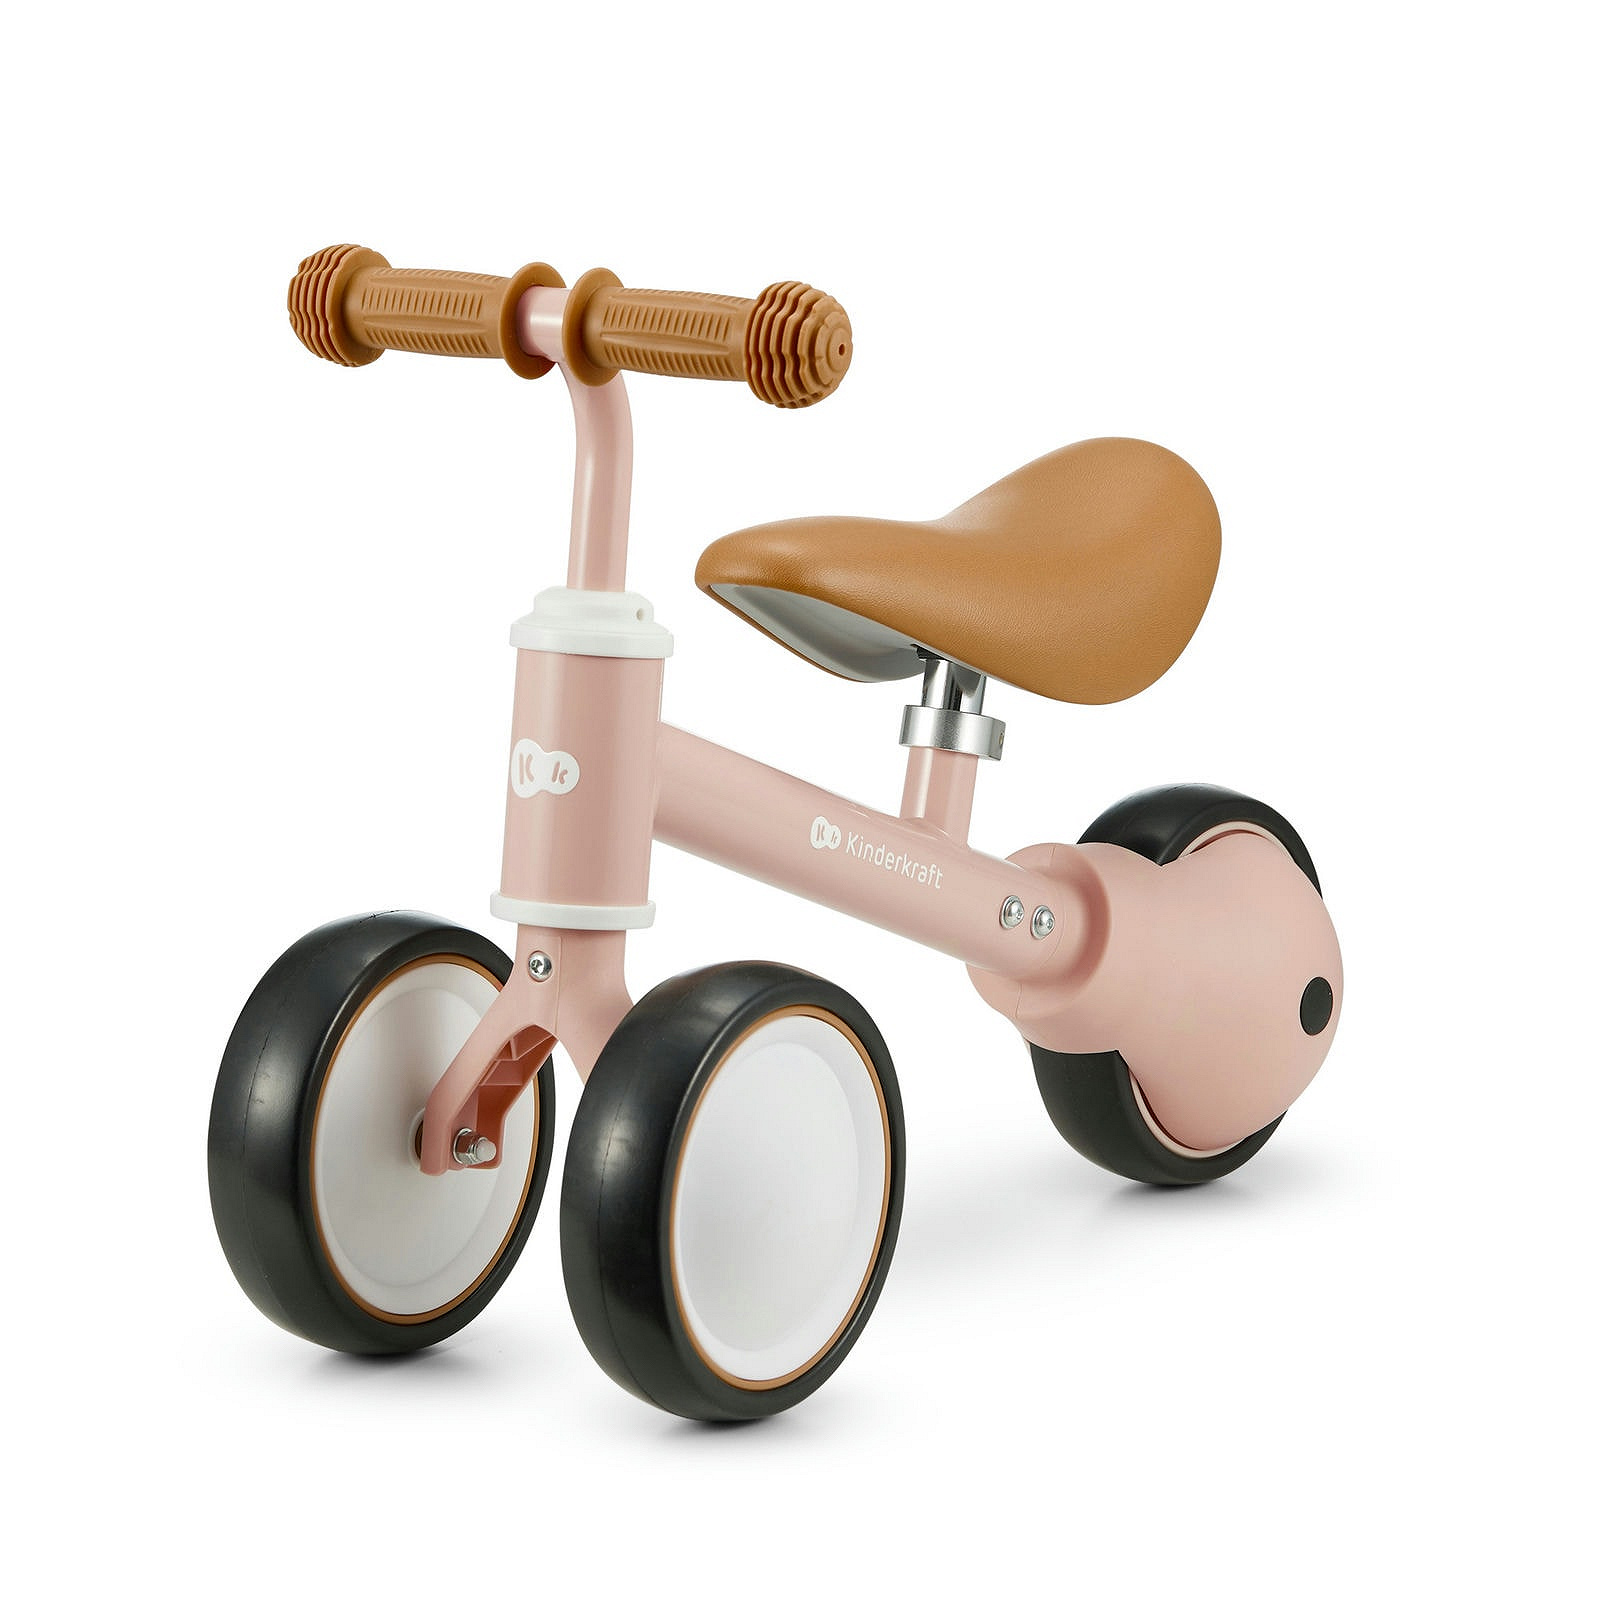 Mini tricycle and ride-on for learning & fun